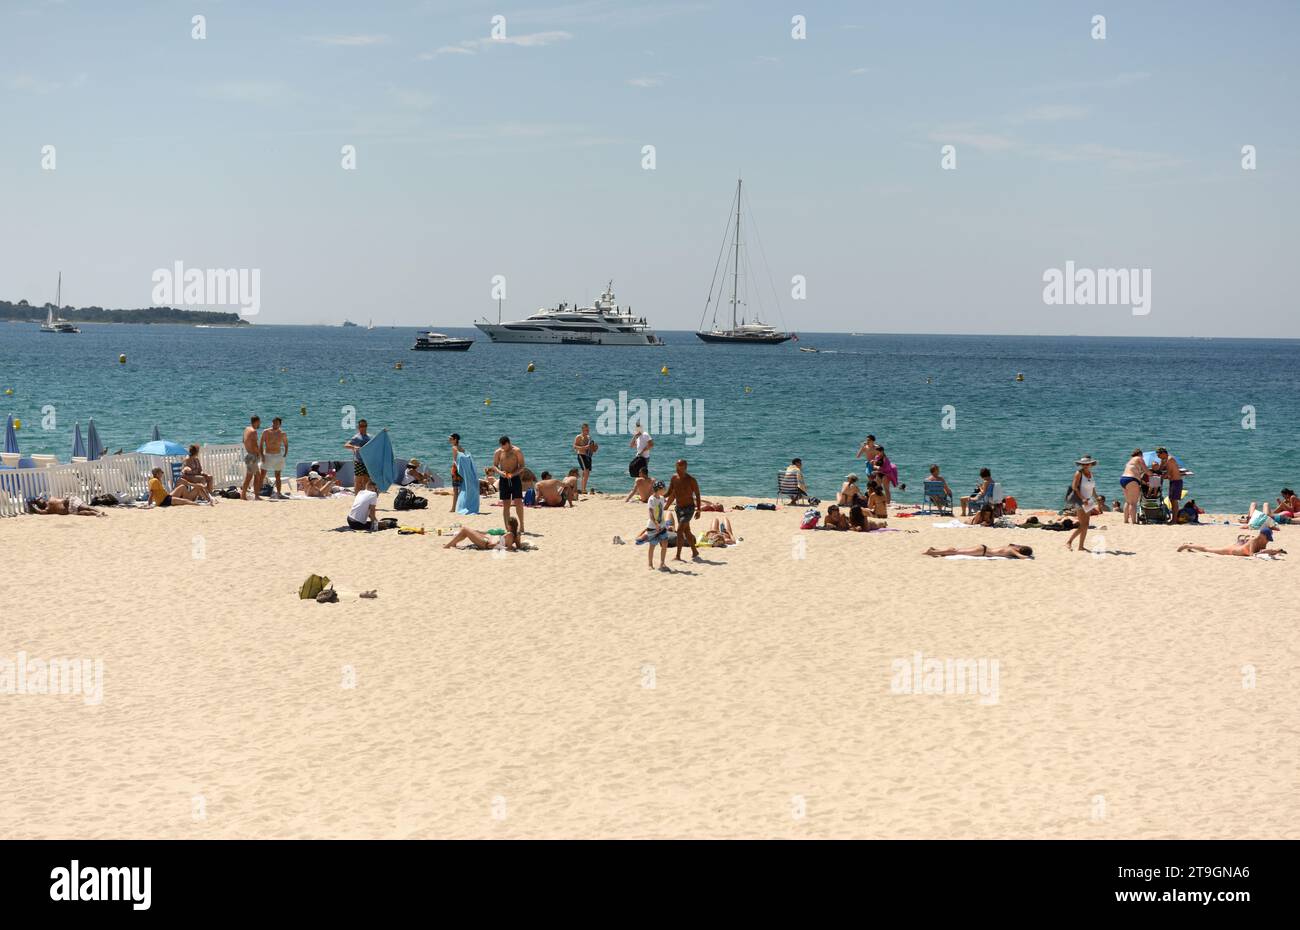 Cannes, France - June 21, 2019: People rest on the beach of the Cannes. Stock Photo